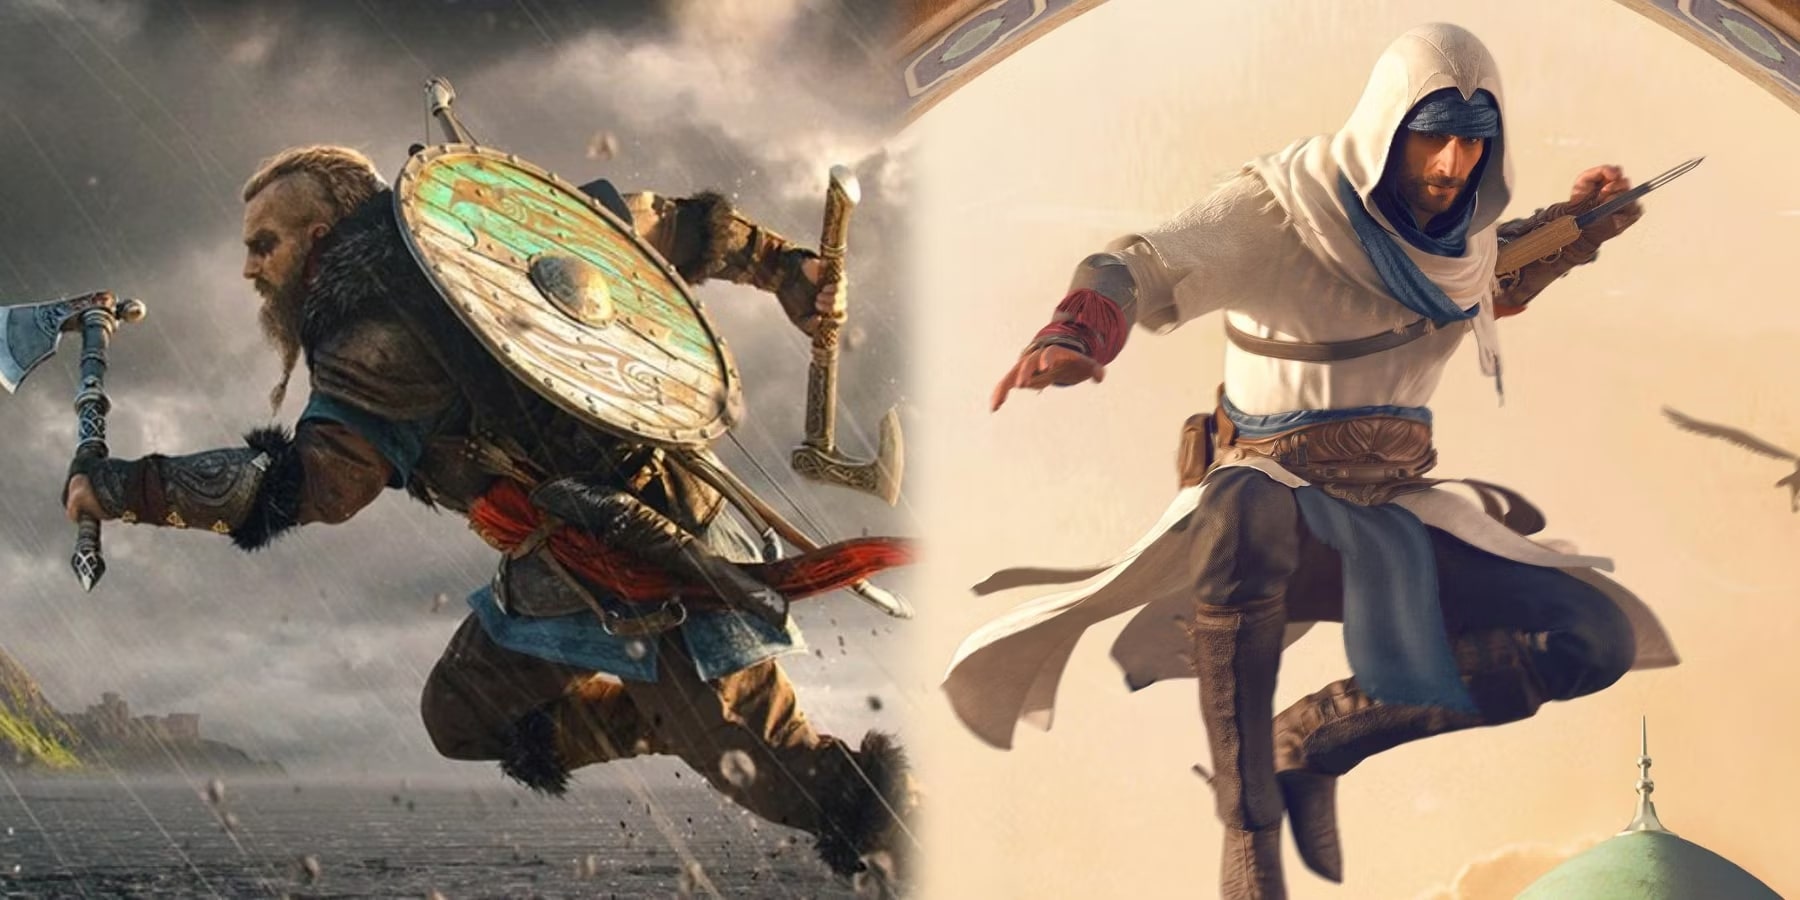 ASSASSIN'S CREED GAMES: IN ORDER - Fierce PC Blog